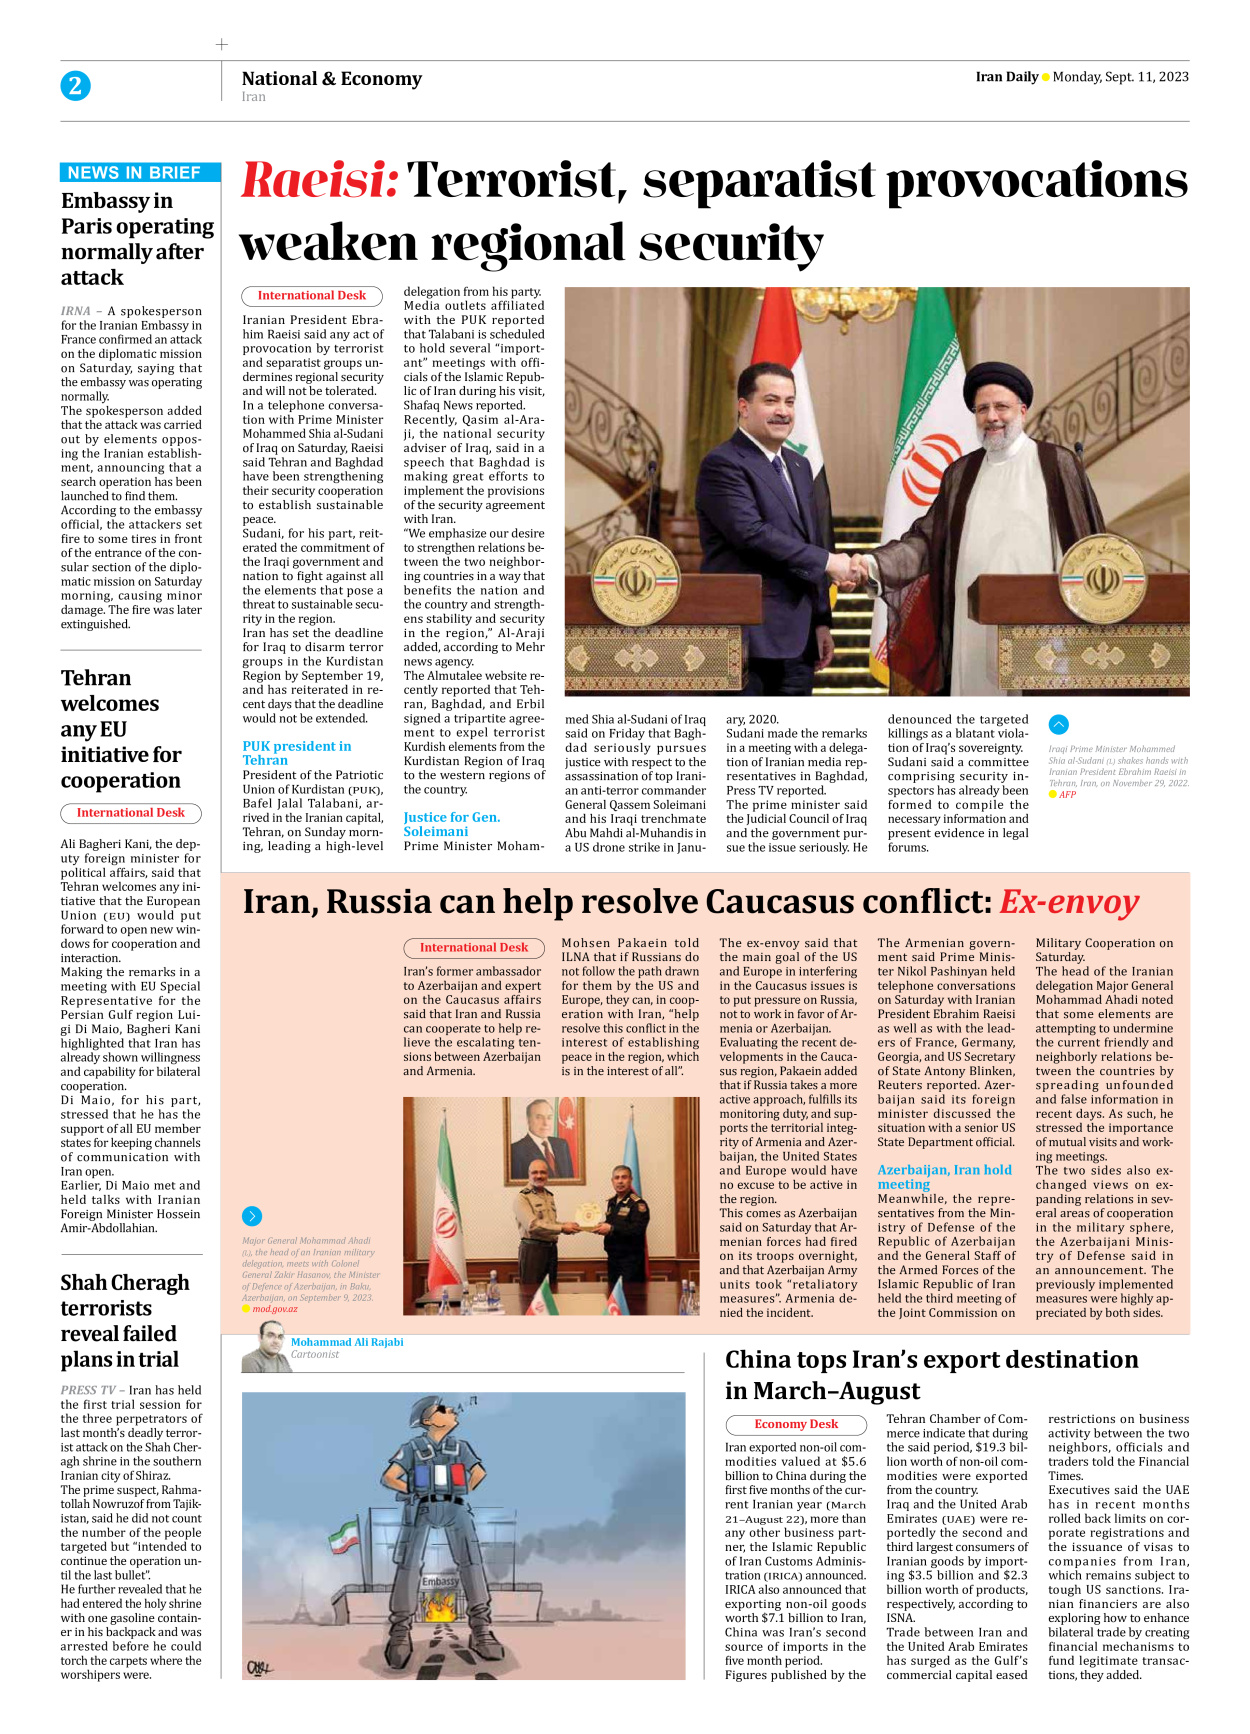 Iran Daily - Number Seven Thousand Three Hundred and Eighty Four - 11 September 2023 - Page 2